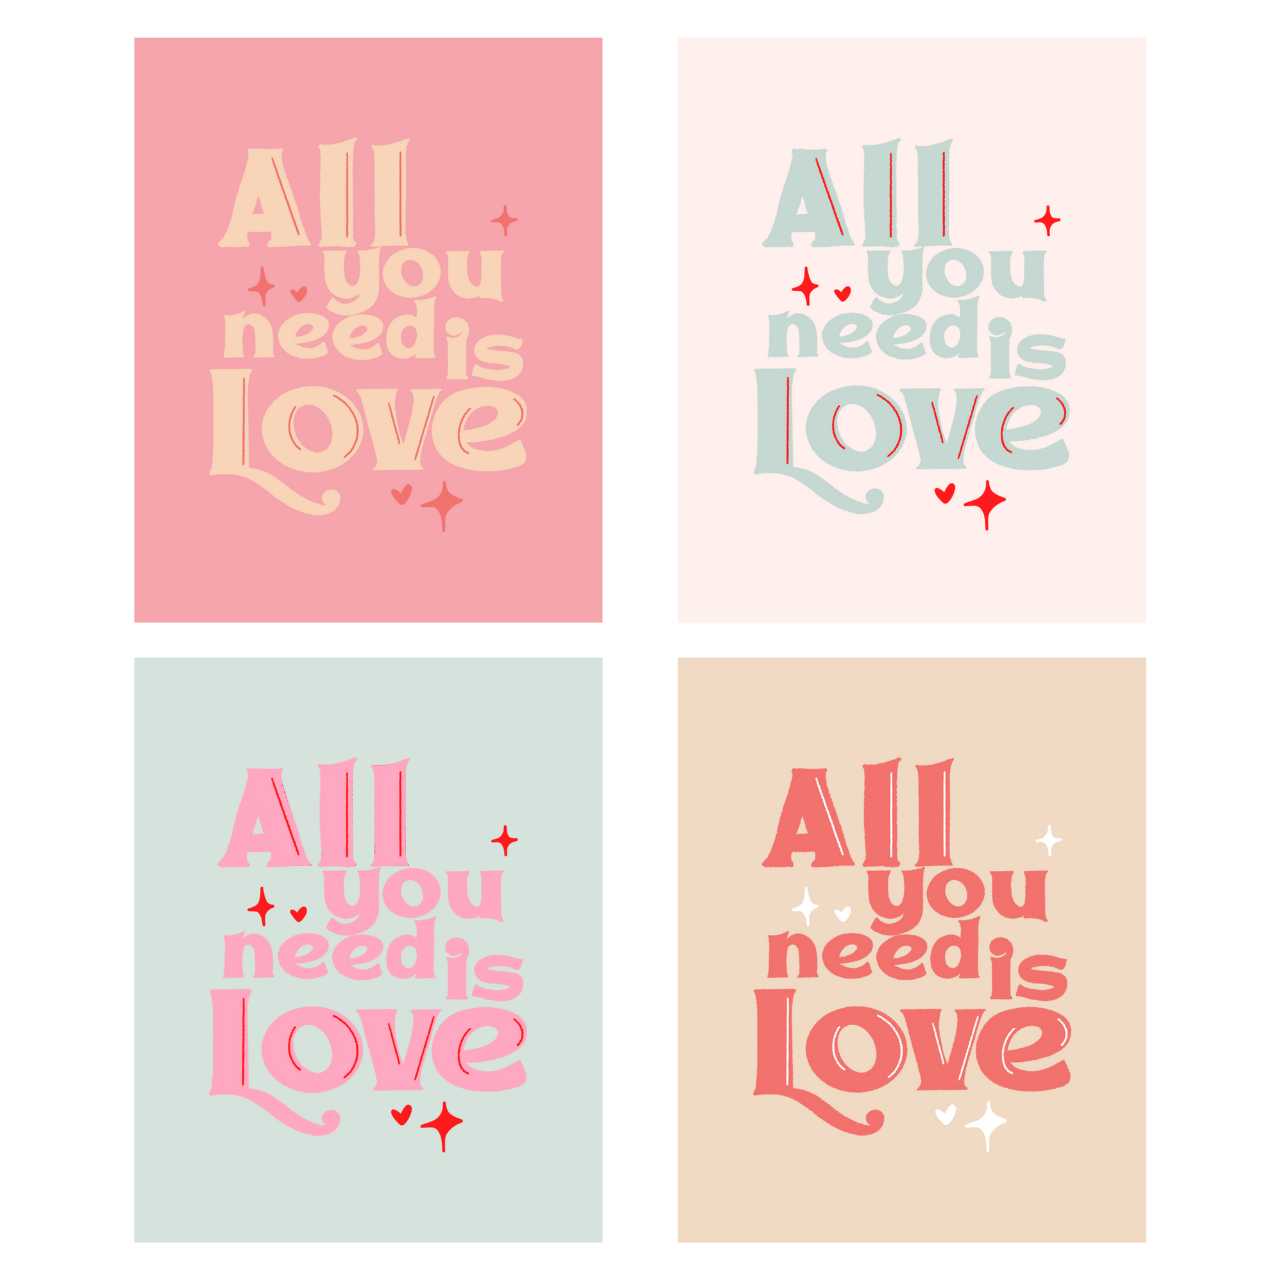 All you need is love | prints